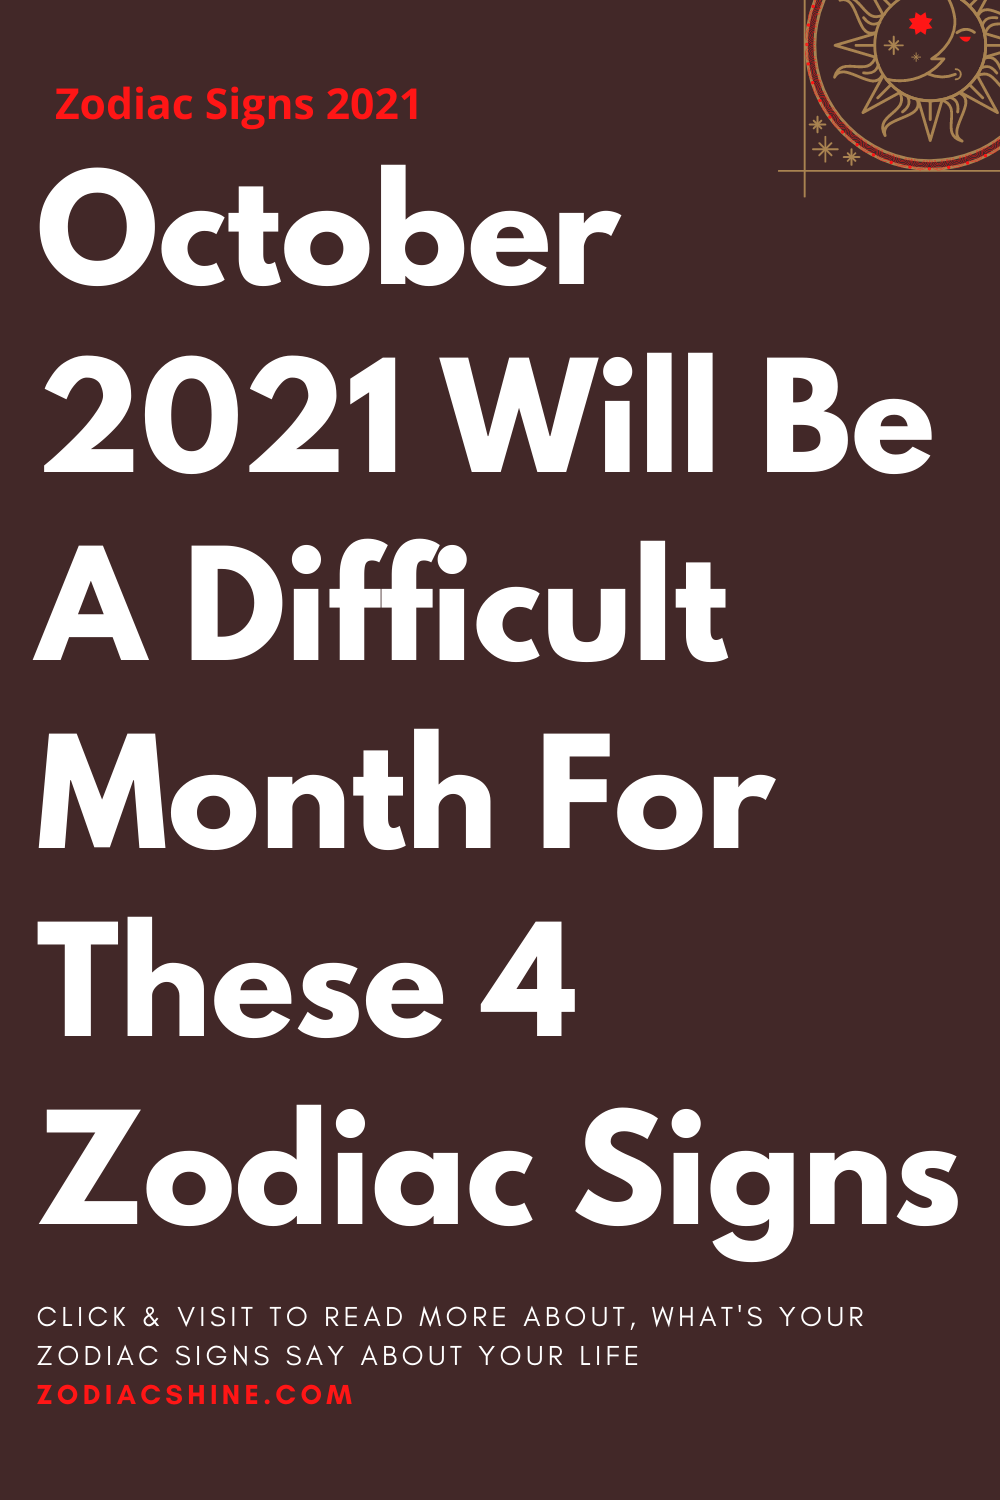 October 2021 Will Be A Difficult Month For These 4 Zodiac Signs